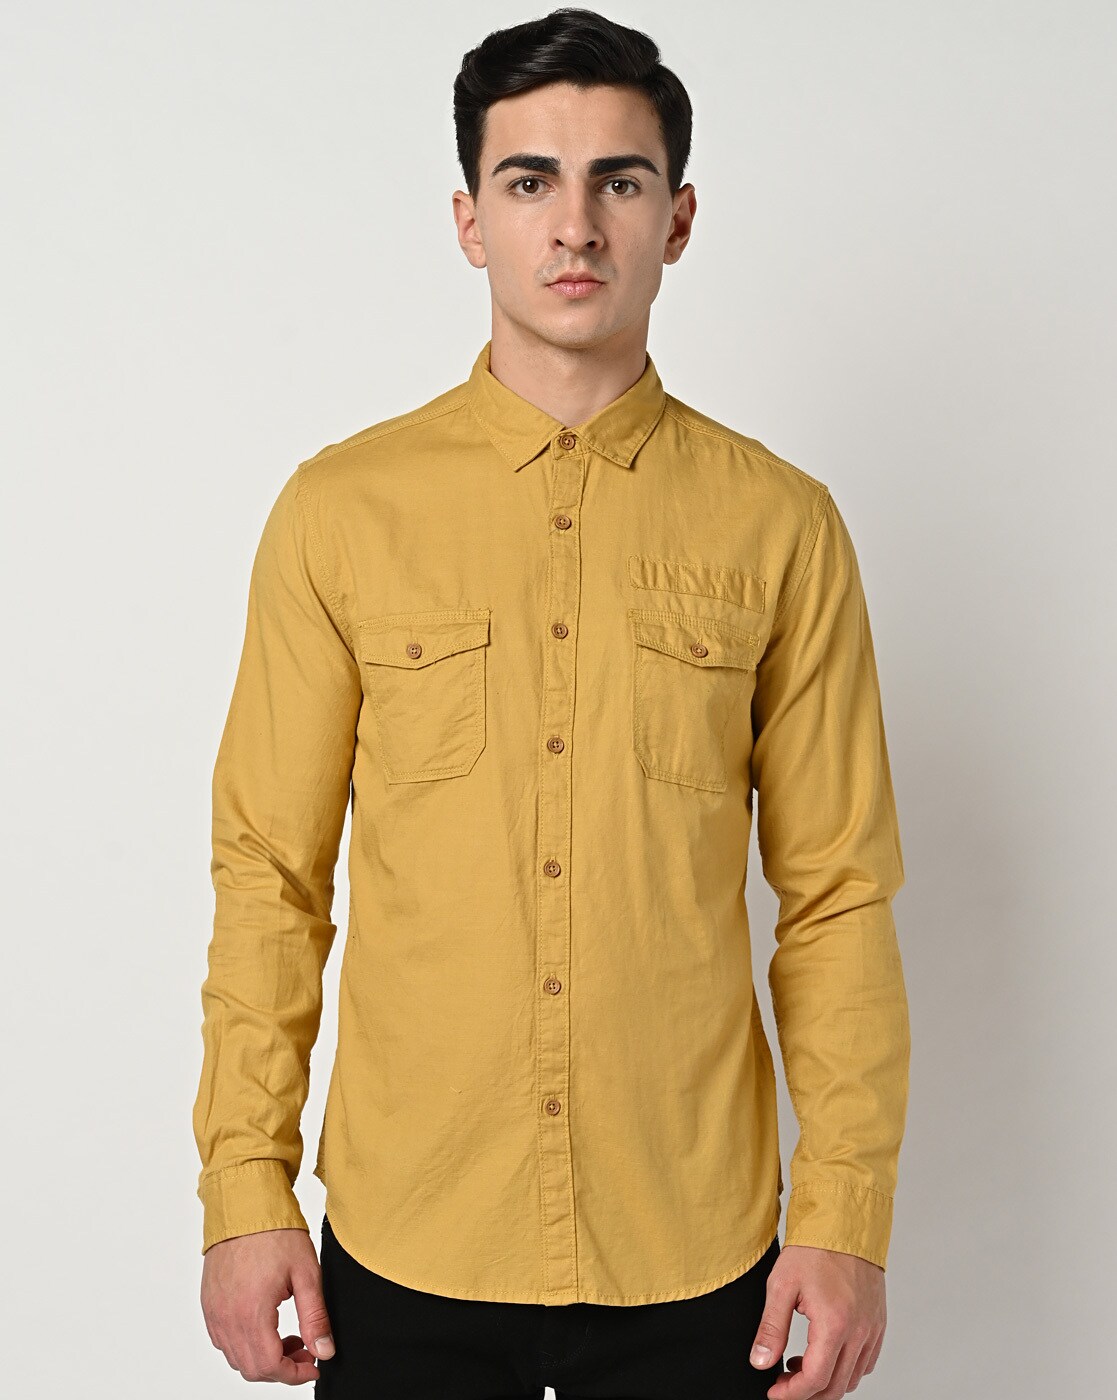 Young Indian Man Wearing Denim Shirt Standing Over Isolated Yellow  Background Cheerful With A Smile Of